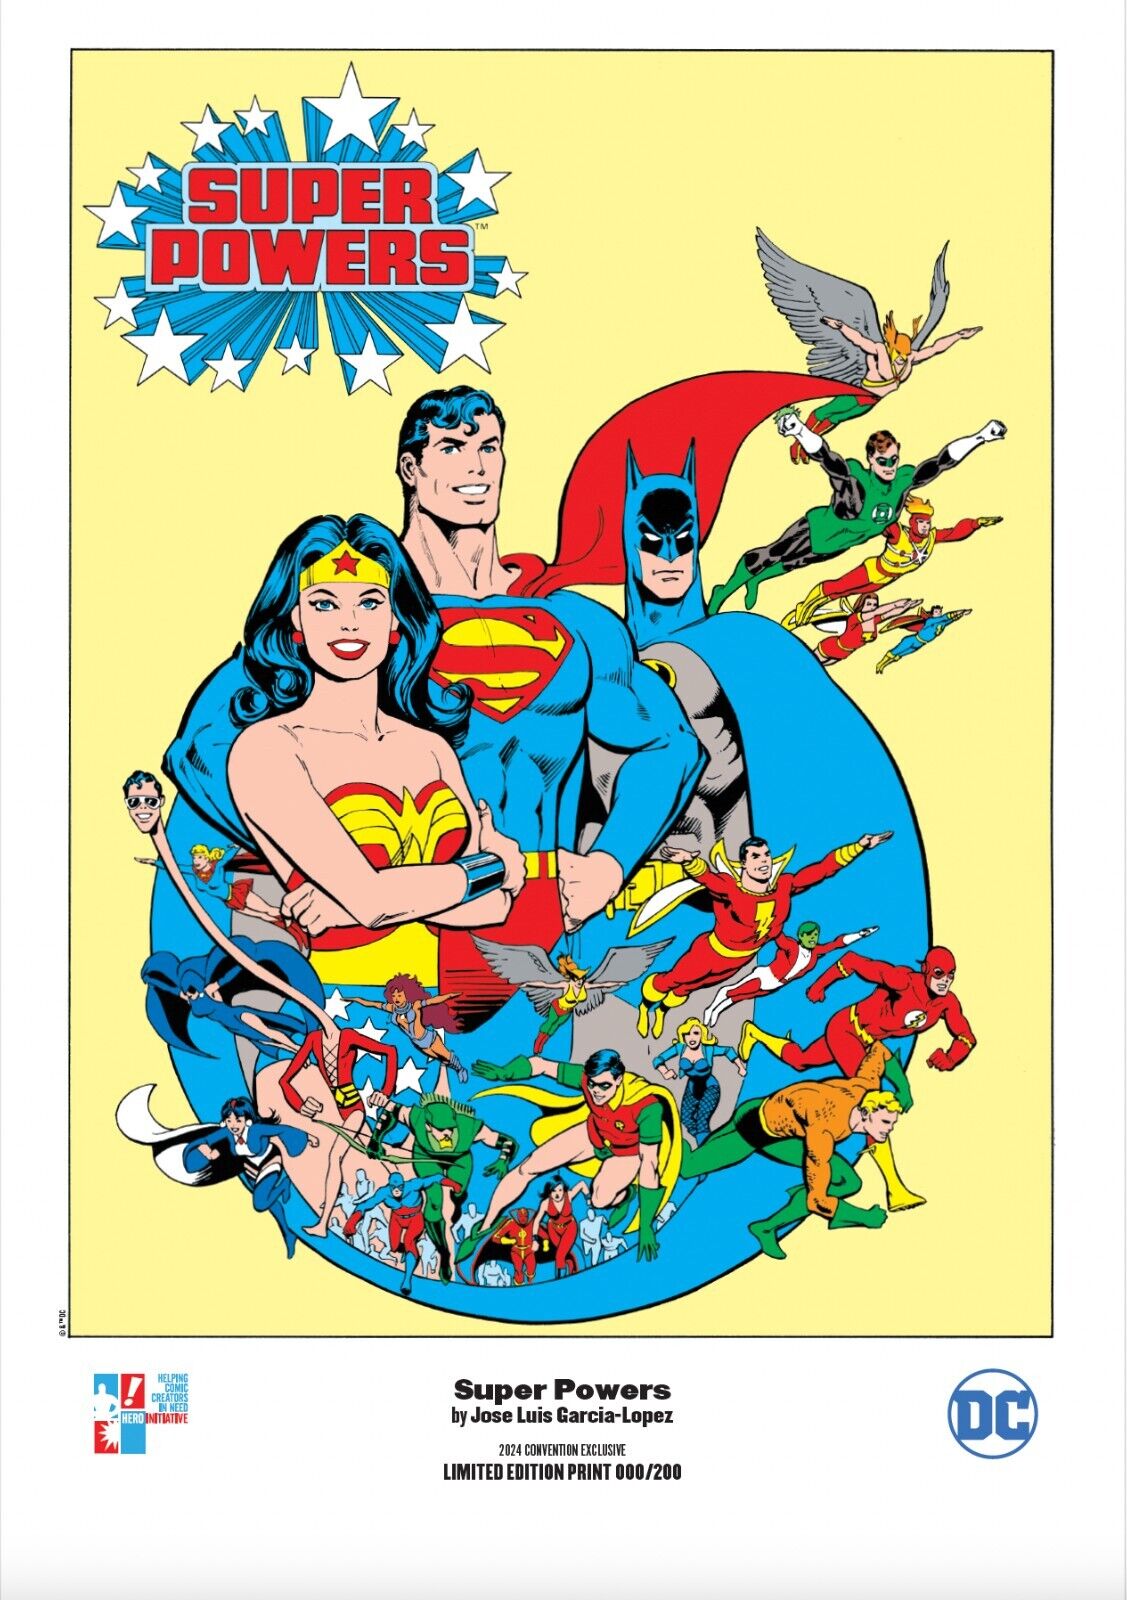 JOSE LUIS GARCIA-LOPEZ signed SUPER POWERS print, limited to 200